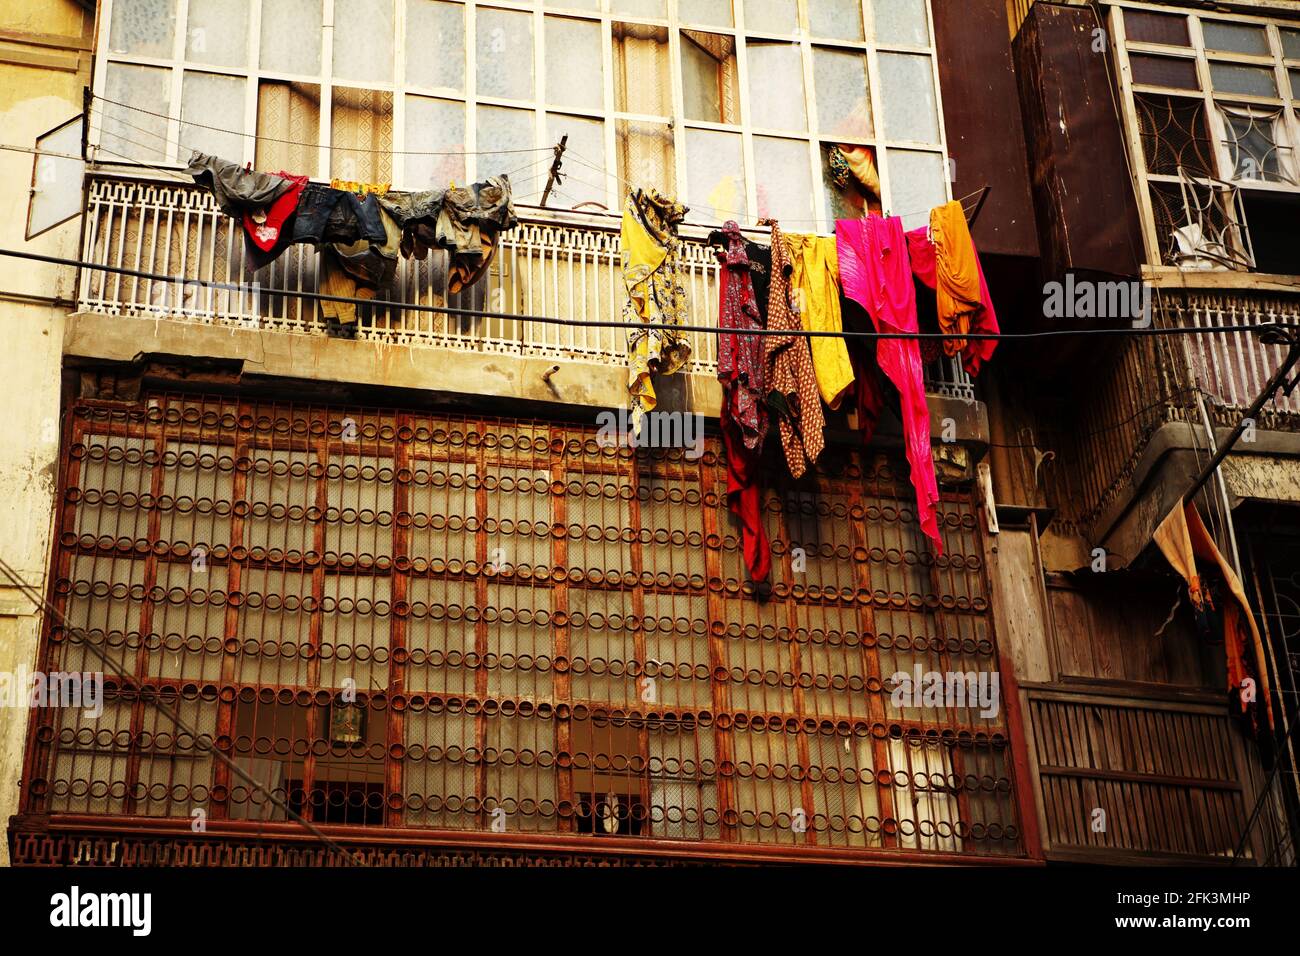 Cloths of women and children are hanging outside balcony of flats in Karachi, Pakistan. Notice the packed windows for the purpose of Purdah. Stock Photo